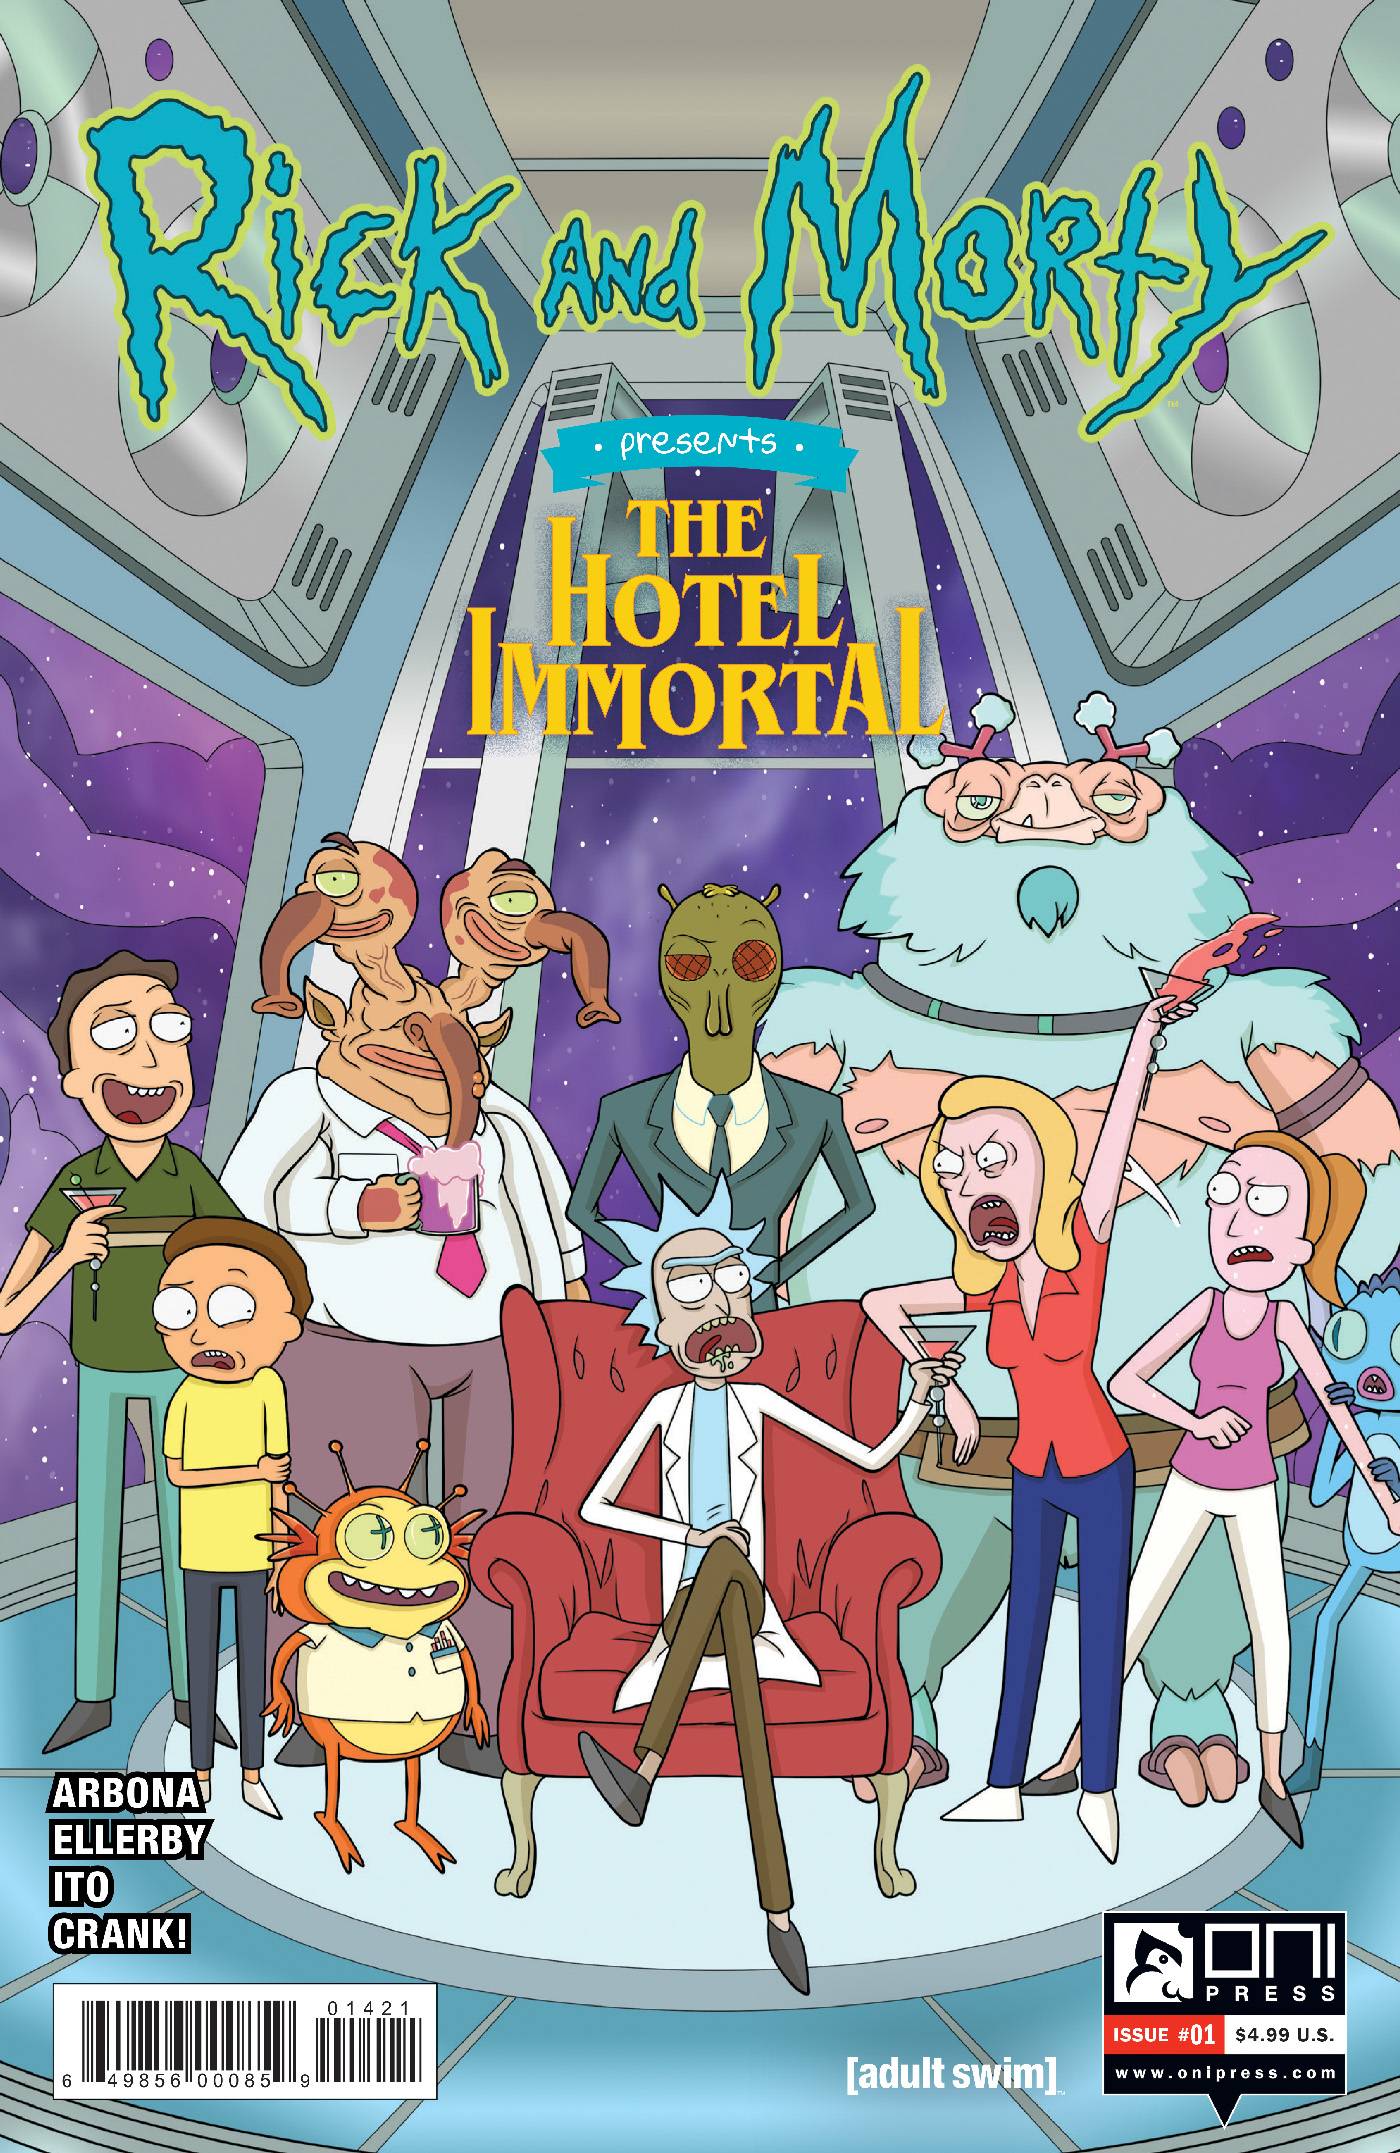 RICK AND MORTY PRESENTS HOTEL IMMORTAL